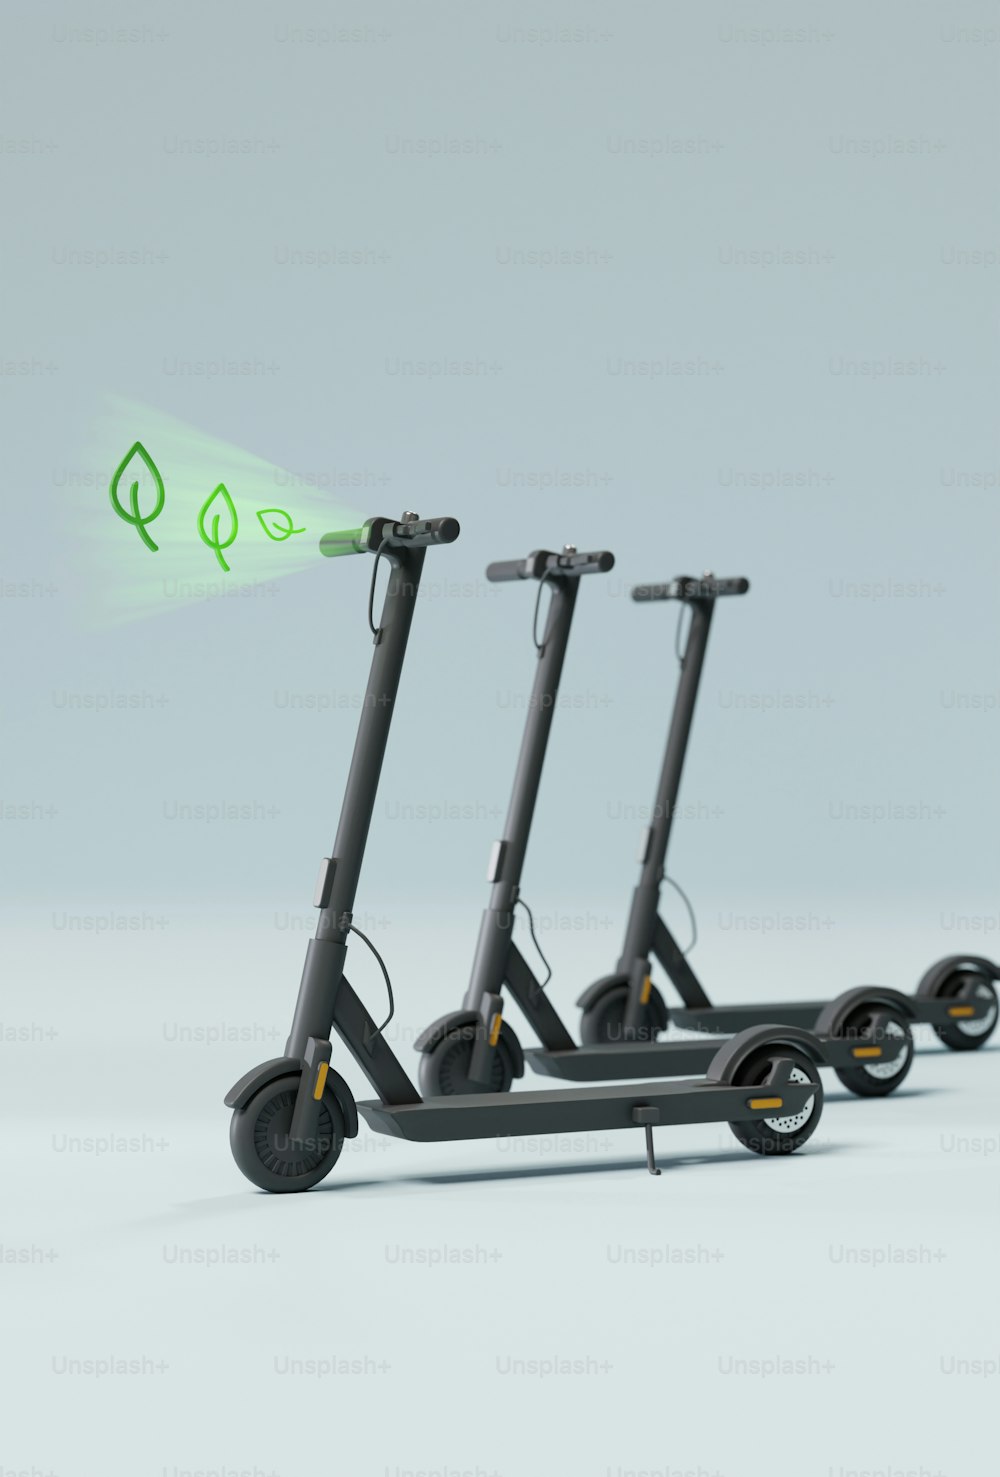 three electric scooters with a green light coming out of them